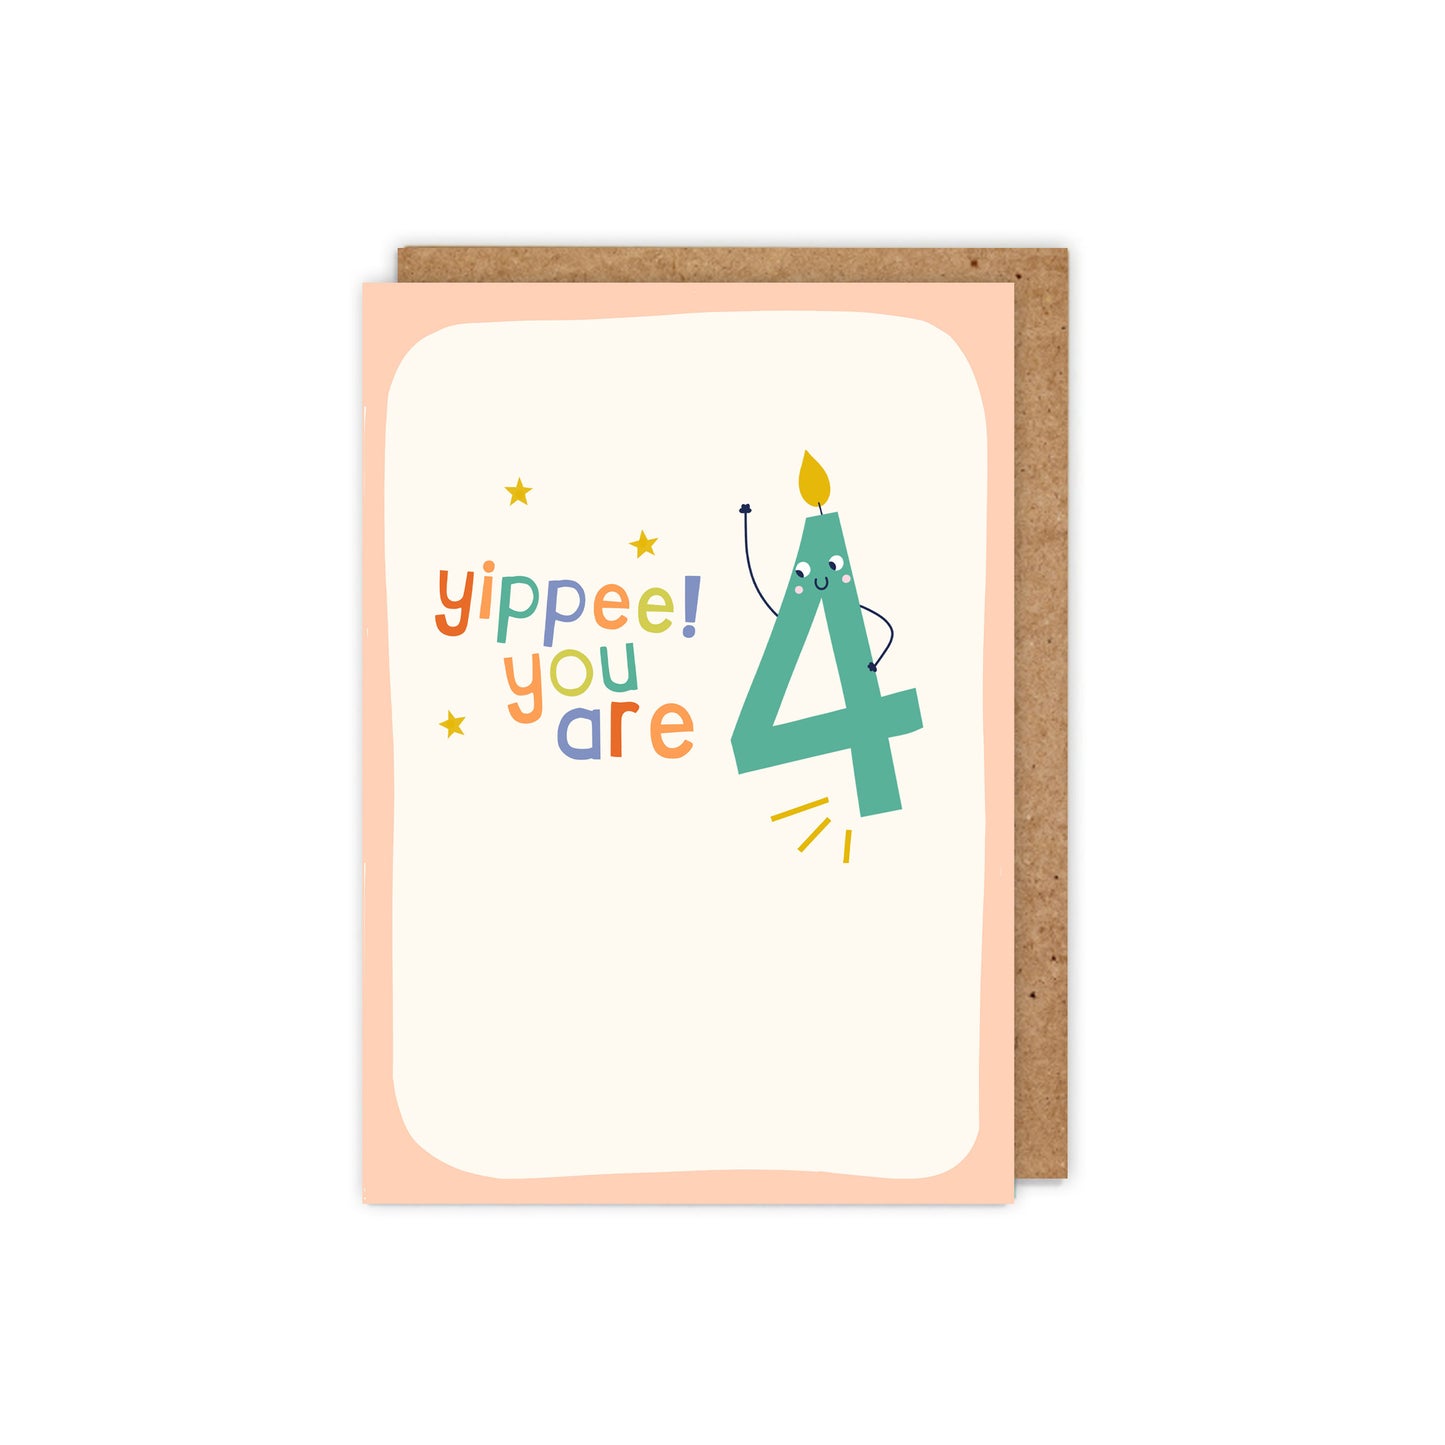 Yippee! You are 4! 4th Birthday Card